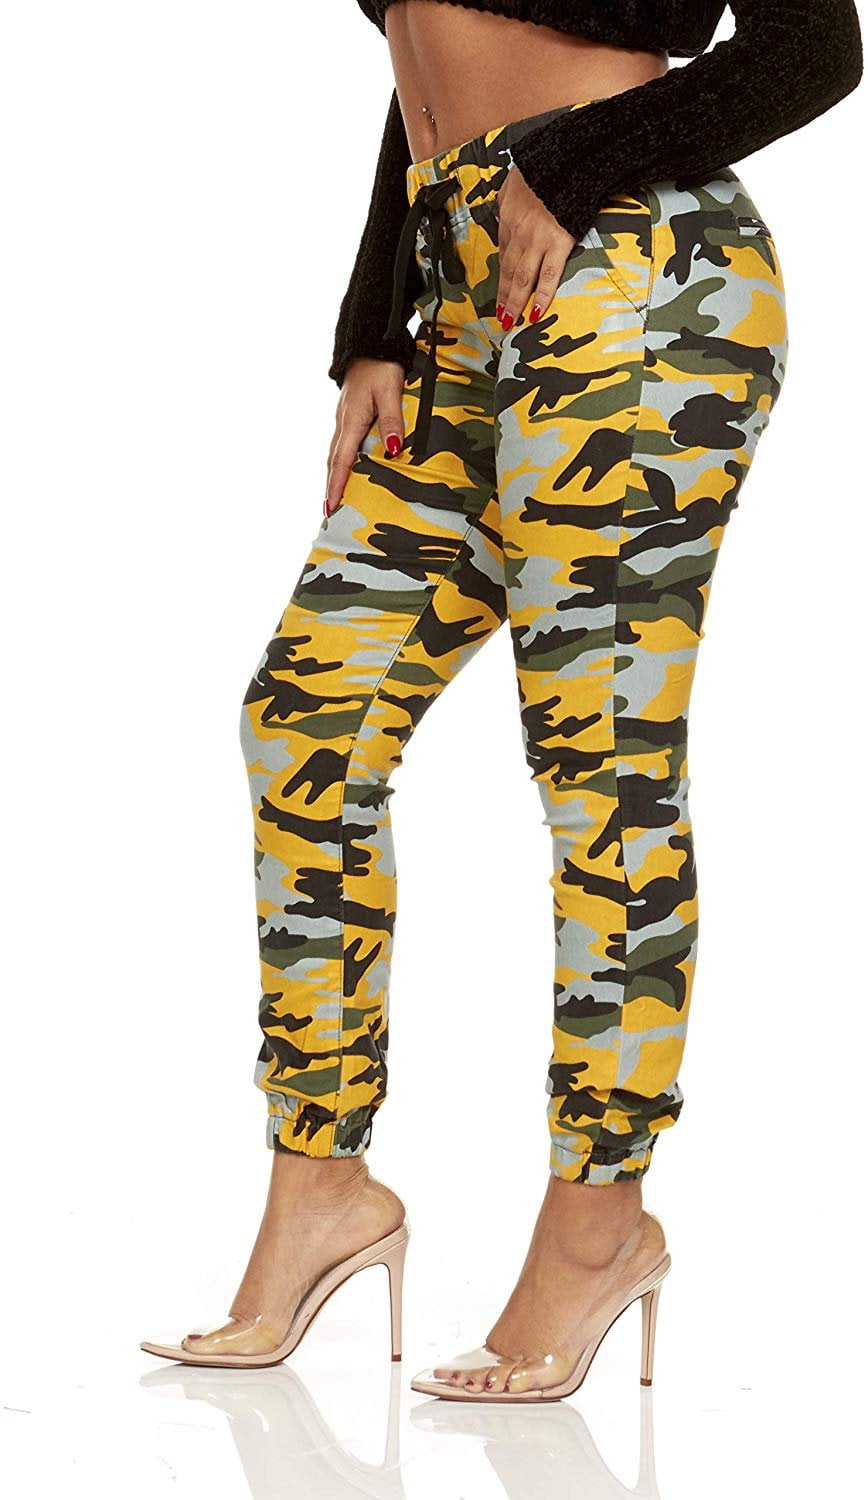 vip jeans colored jogger pants